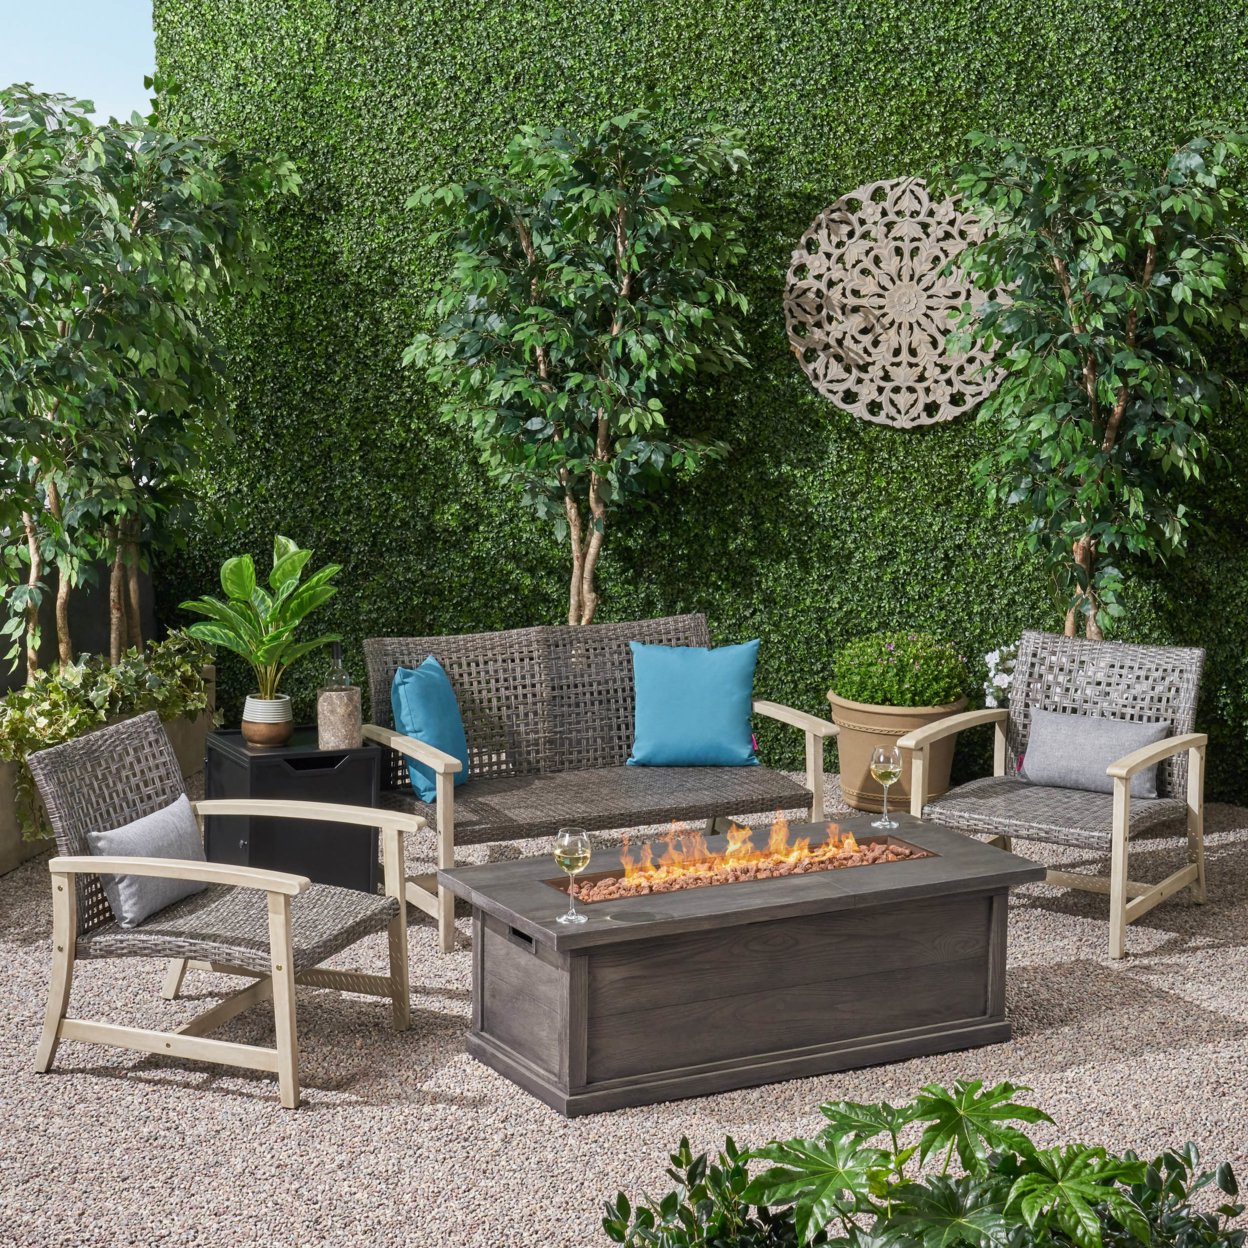 Rachel Outdoor 5 Piece Wood And Wicker Chat Set With Fire Pit - Mixed Black + Light Gray Washed Finish + Gray + Black